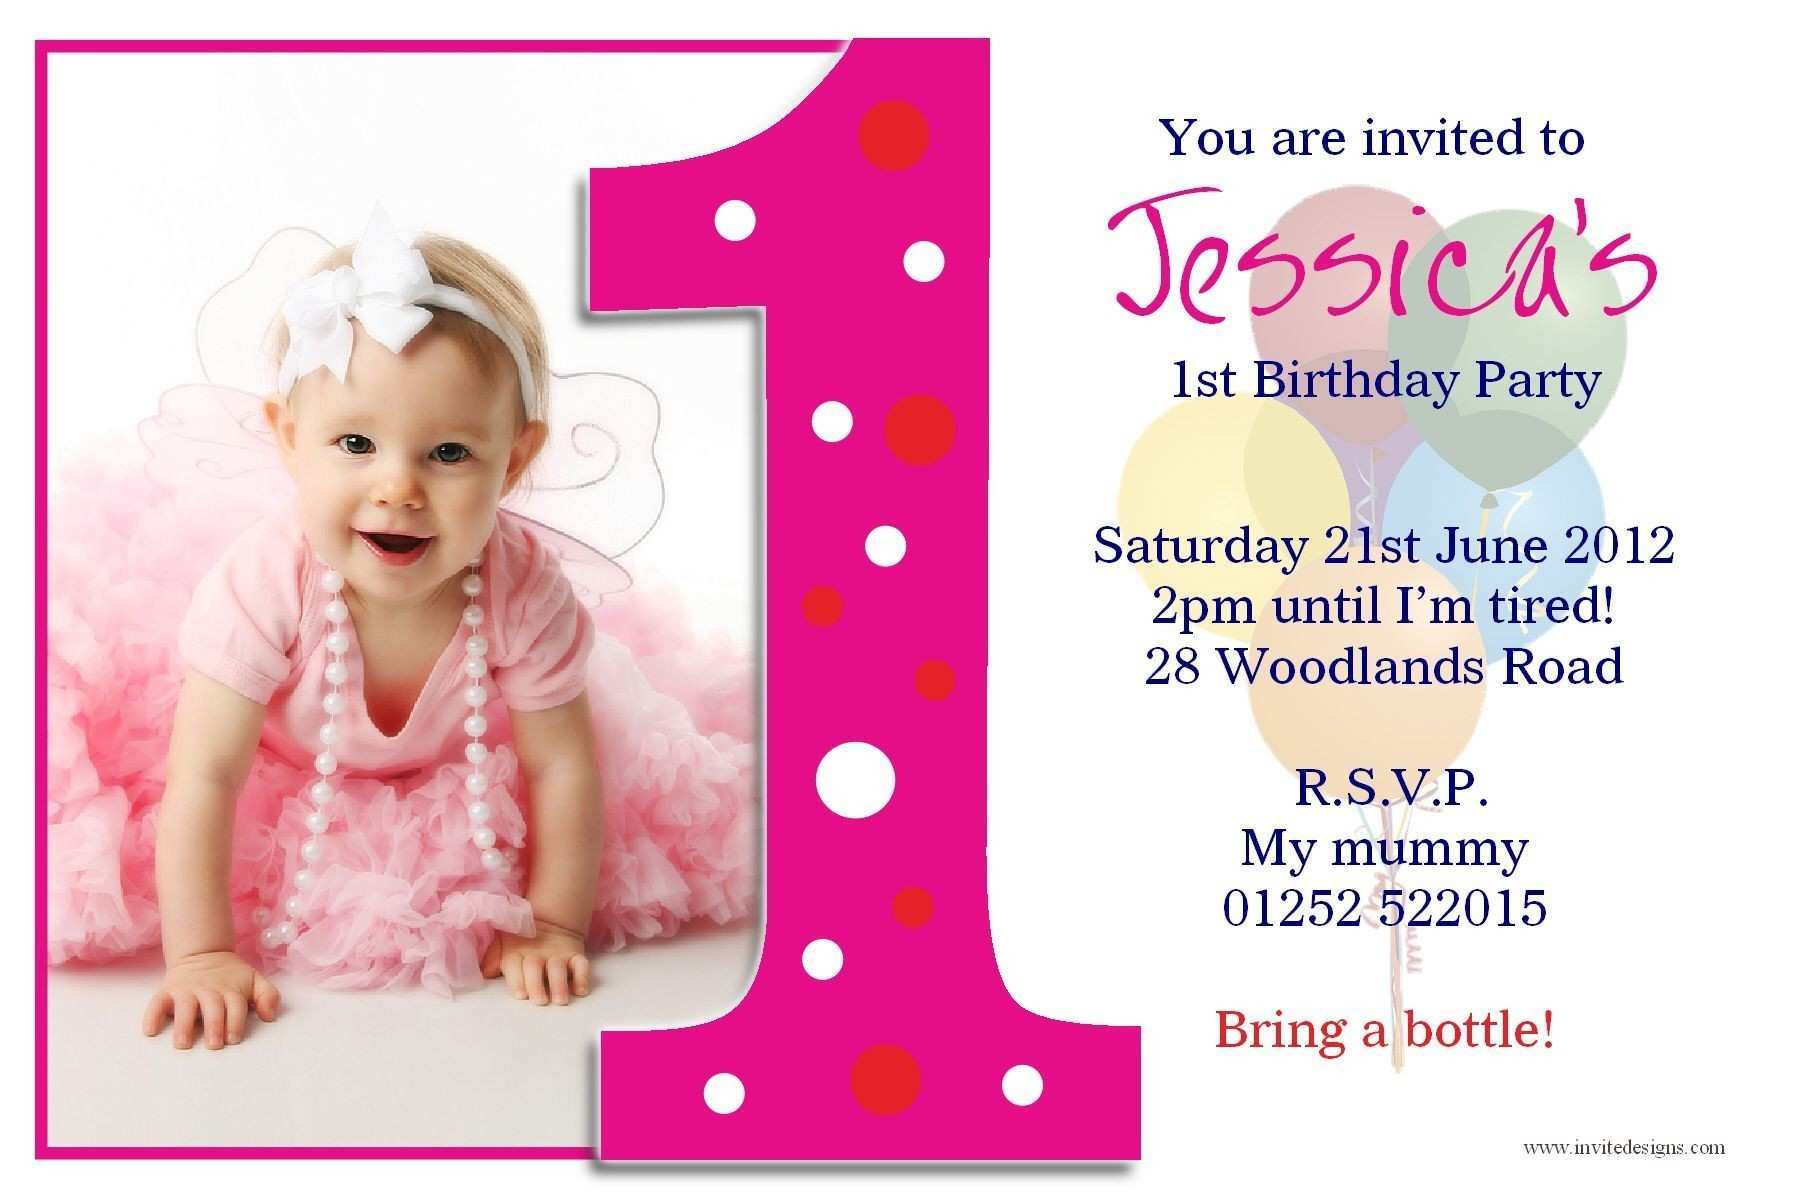 44 Format Example Of Invitation Card For 7Th Birthday in Word by Example Of Invitation Card For 7Th Birthday